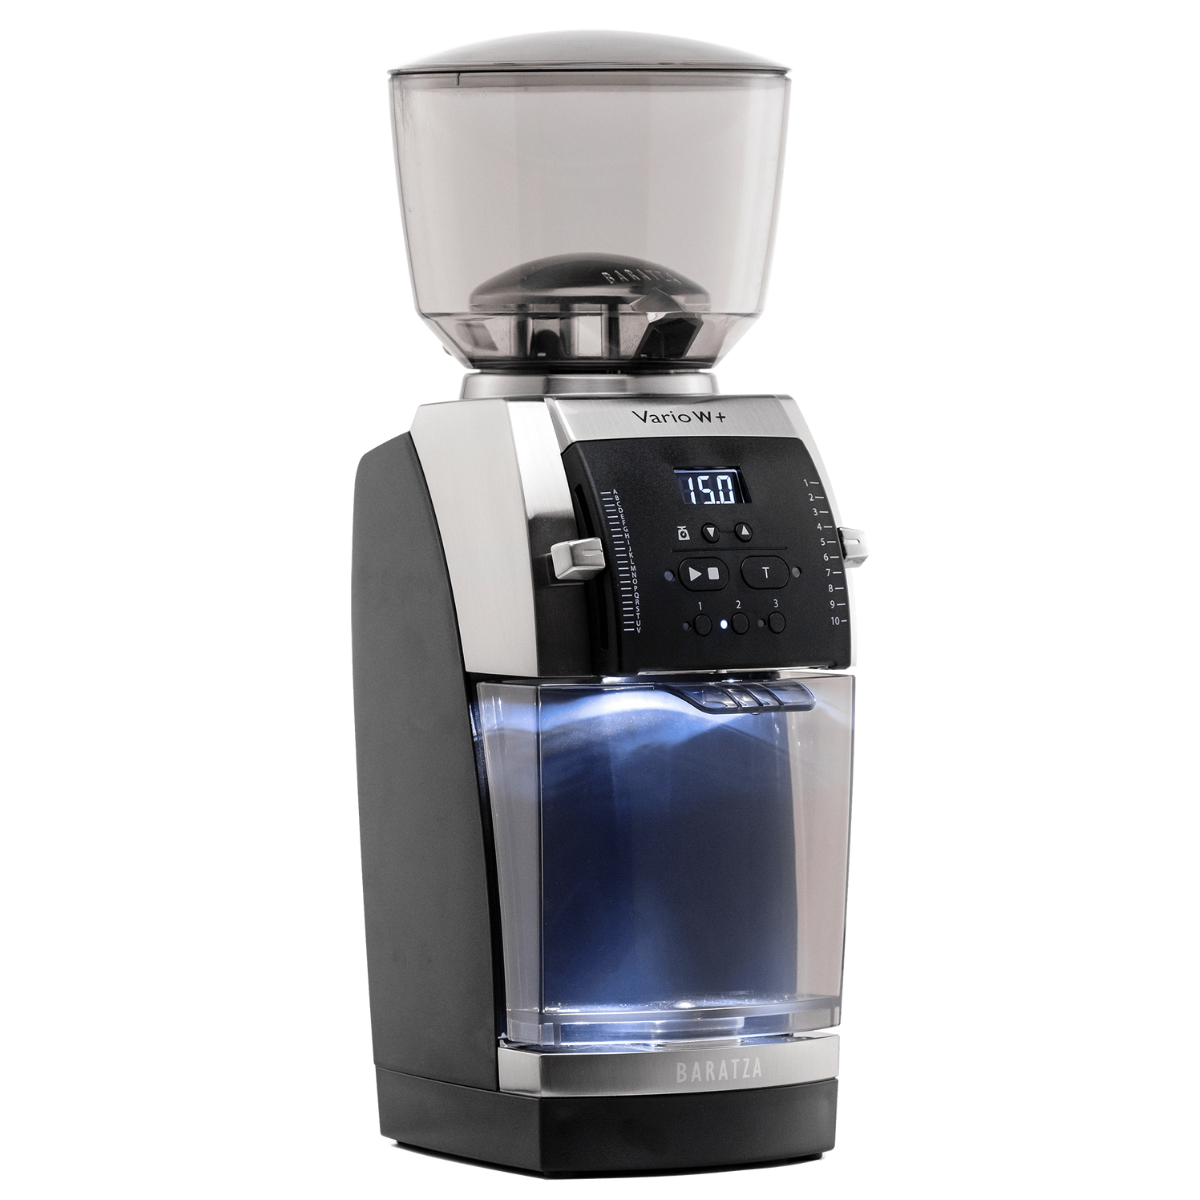 Baratza Reinvents the Vario with the Vario+ and Vario-W+